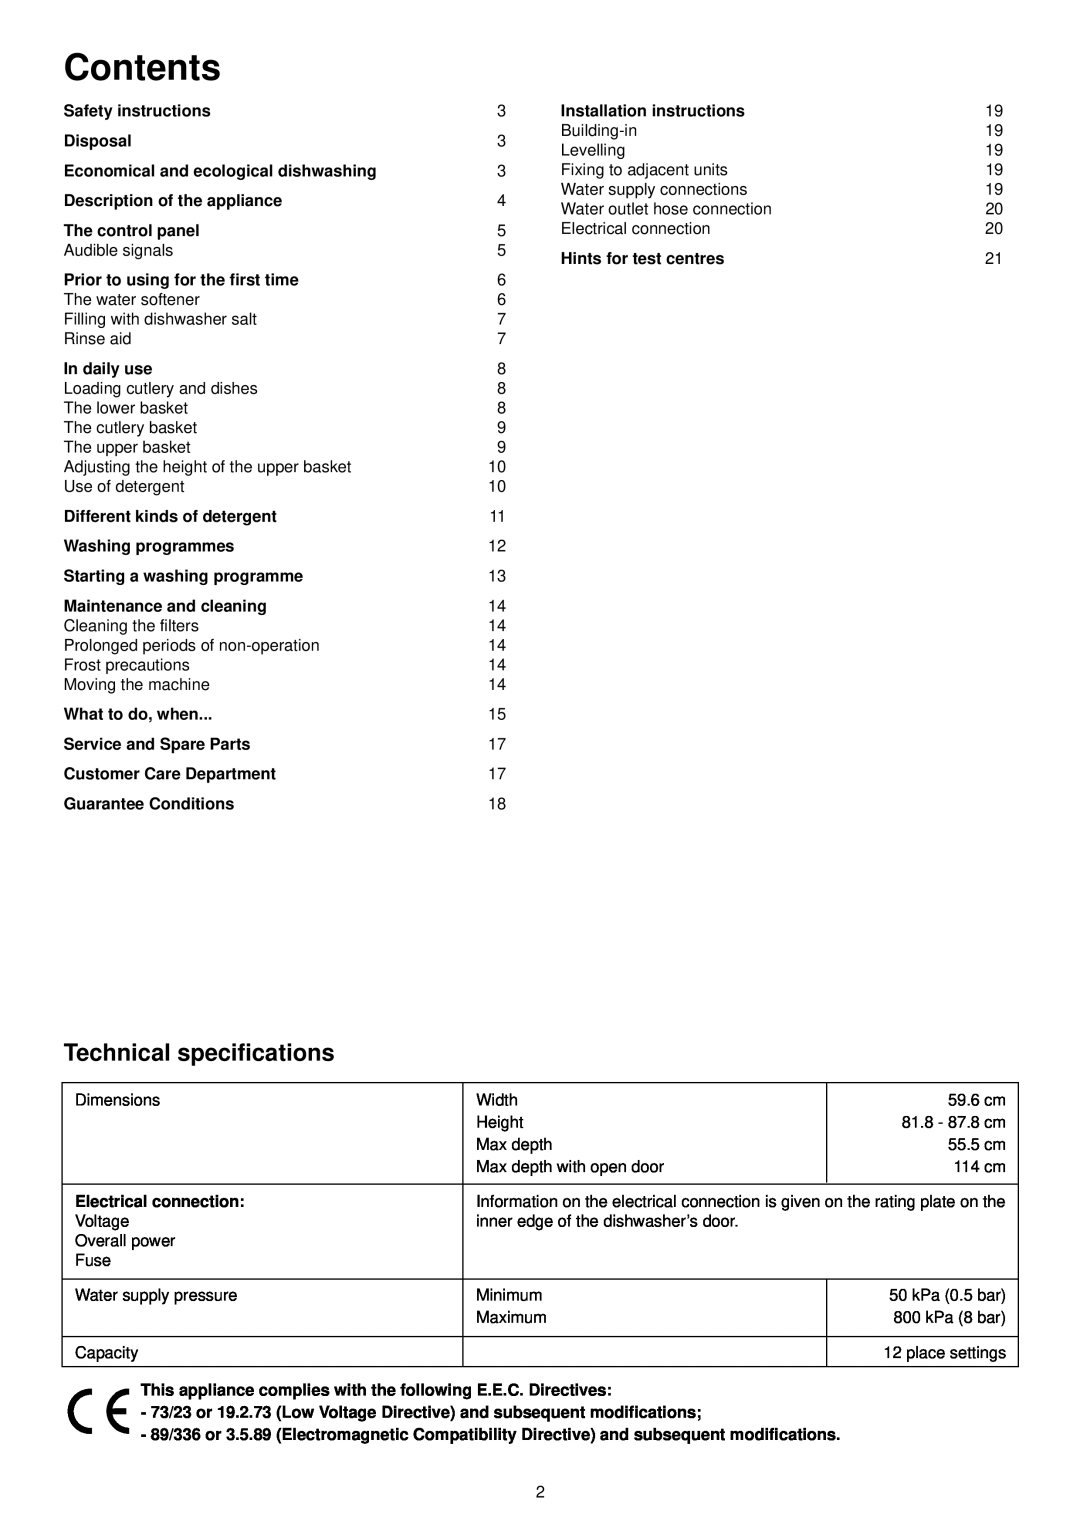 Zanussi ZDT 6053 manual Contents, Technical specifications 